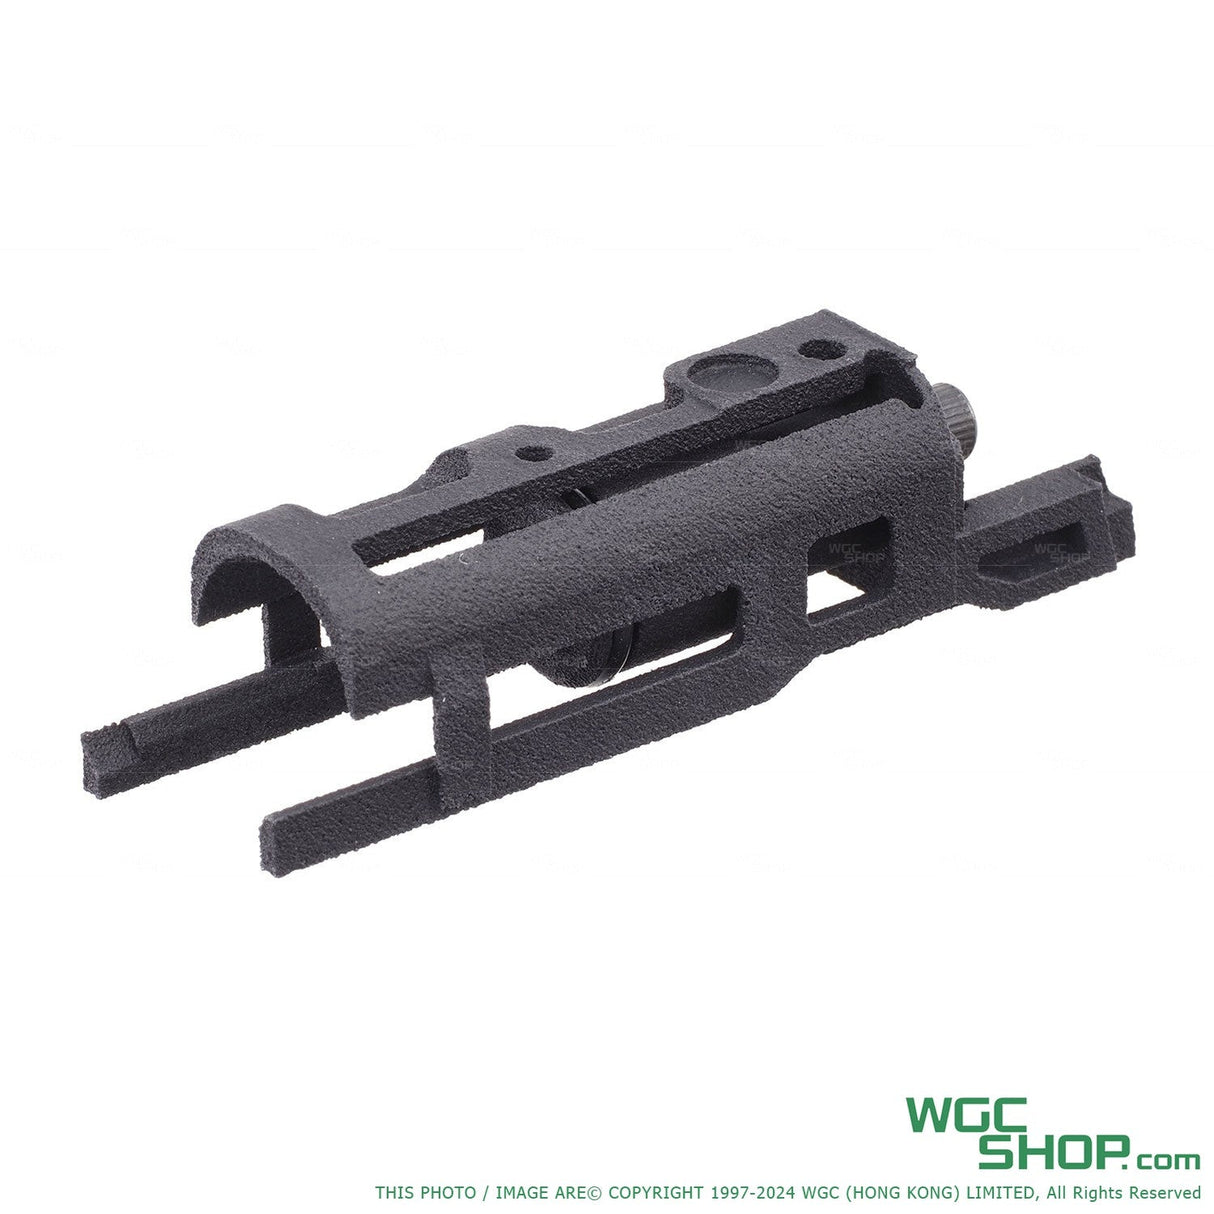 REVANCHIST 3DP Ultra Lightweight Blowback Unit for Marui Hi-Capa GBB Airsoft ( Reduced Recoil )